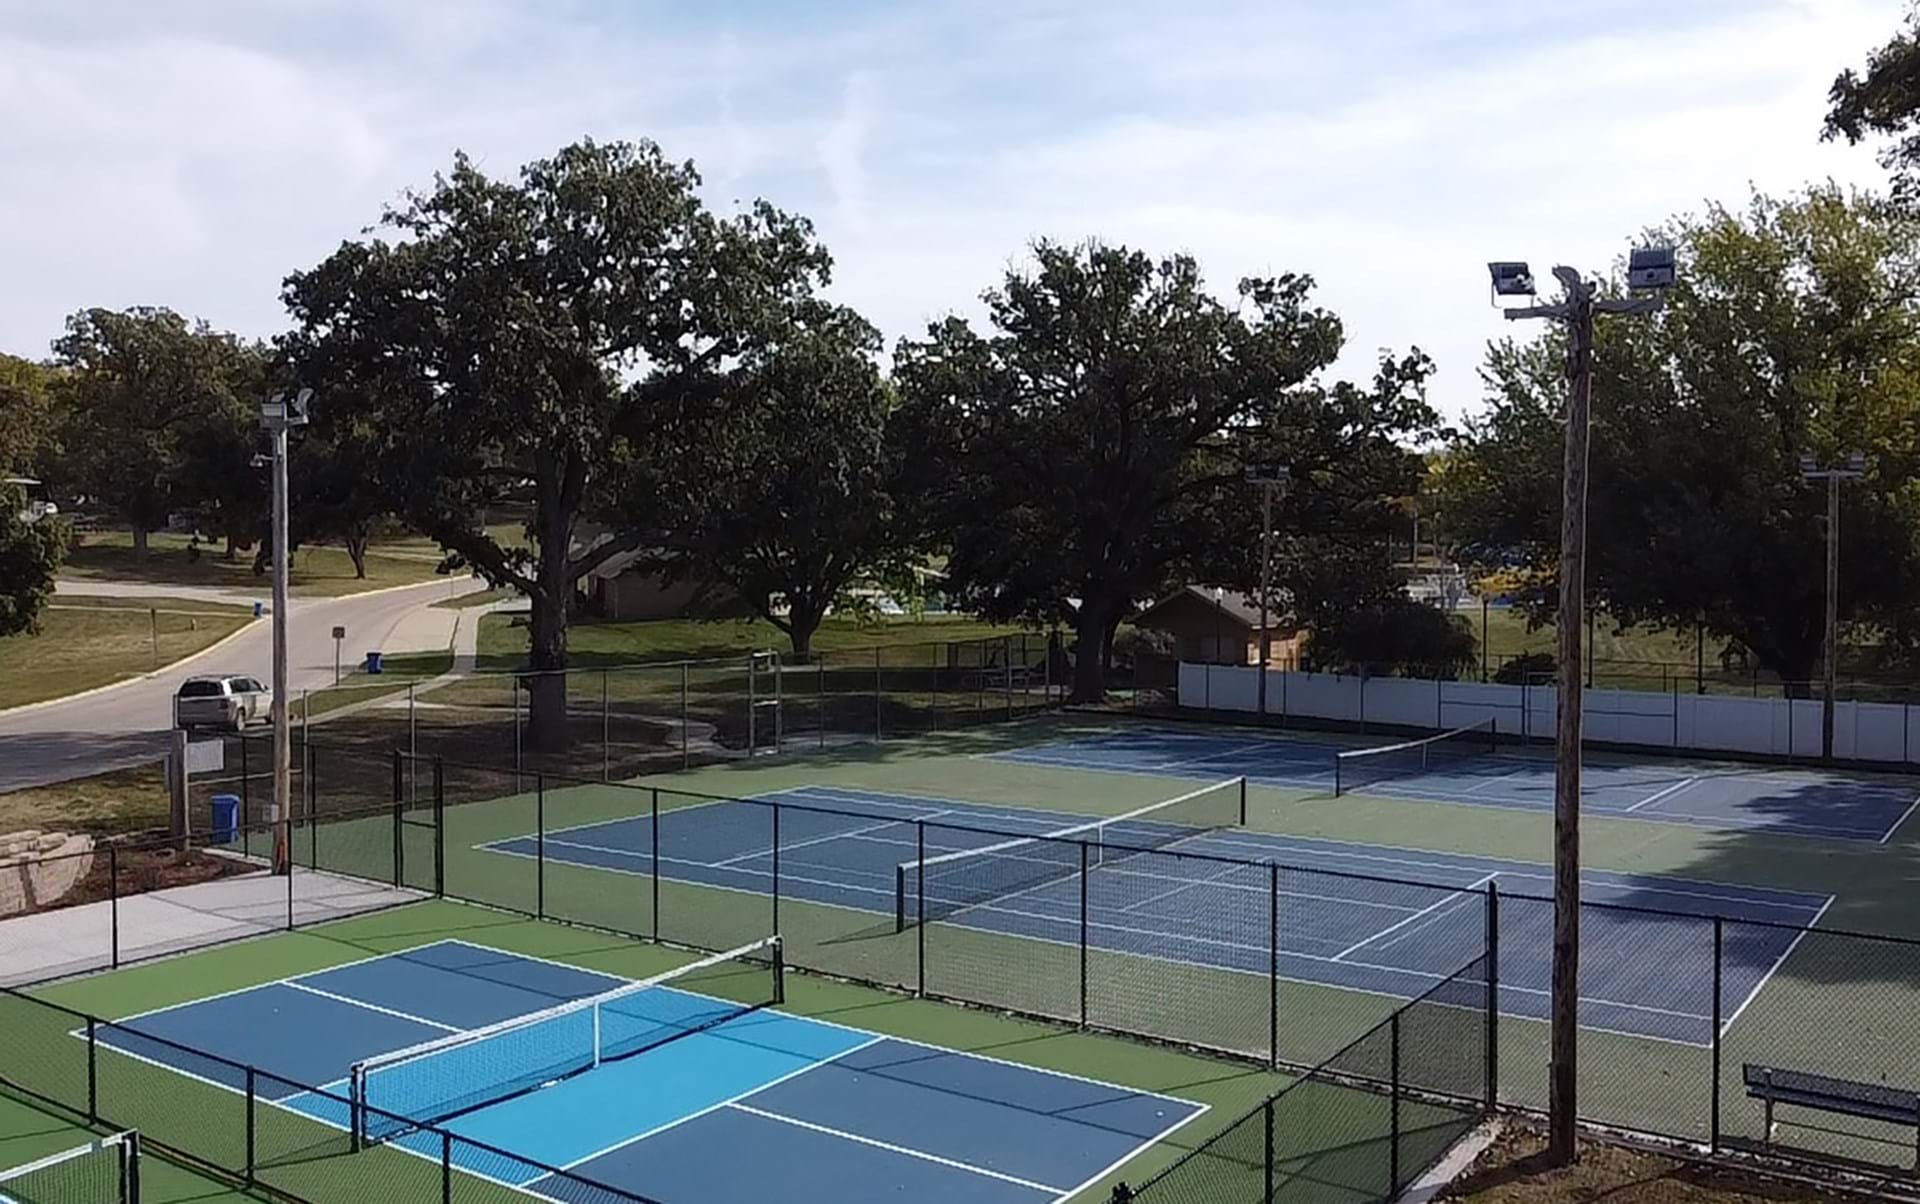 Two new pickleball courts were added in the fall of 2022.